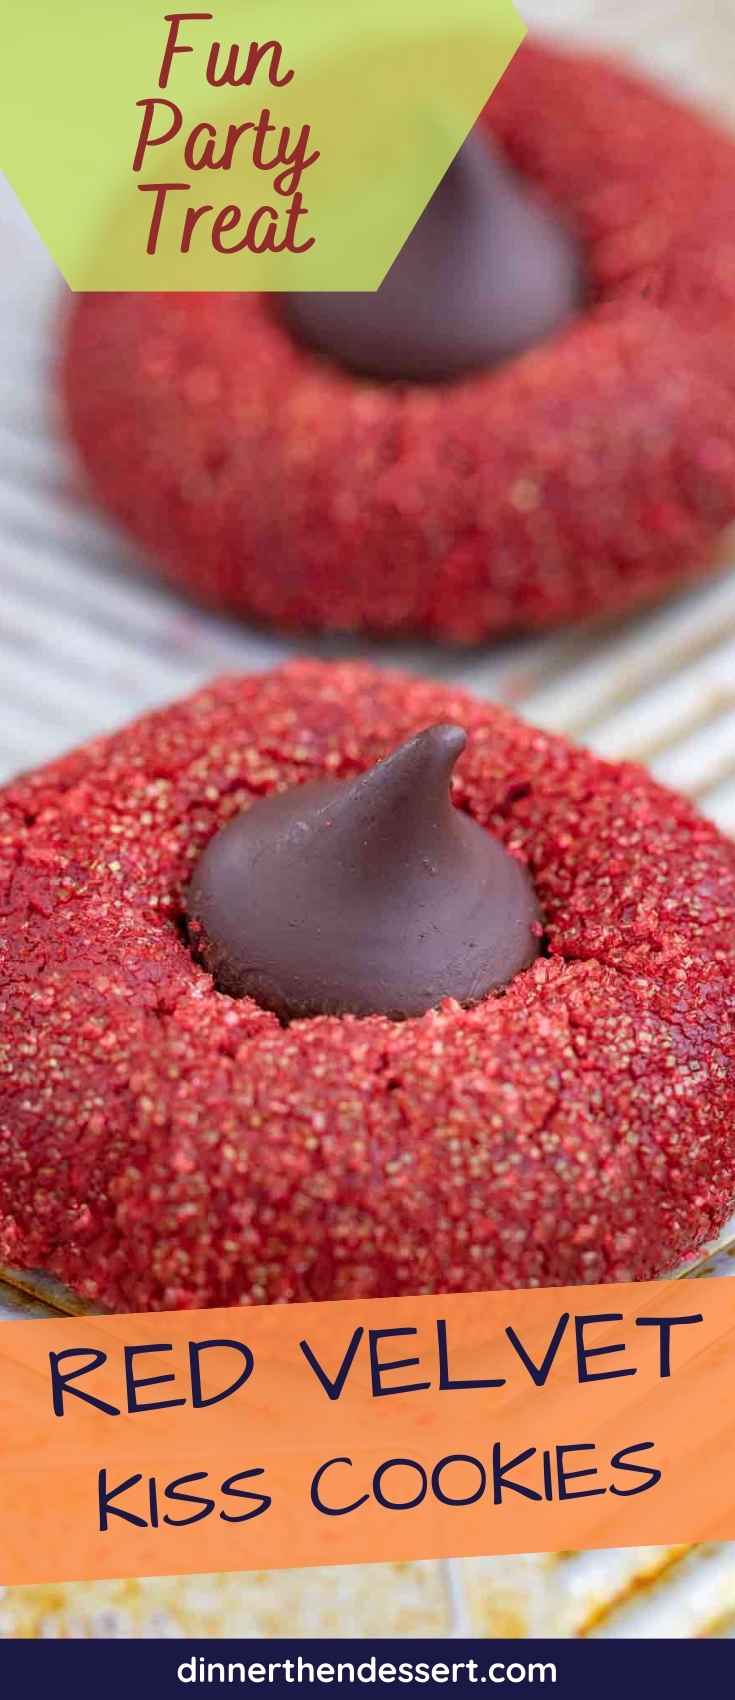 Red Velvet Kiss Cookies on tray Pin 1